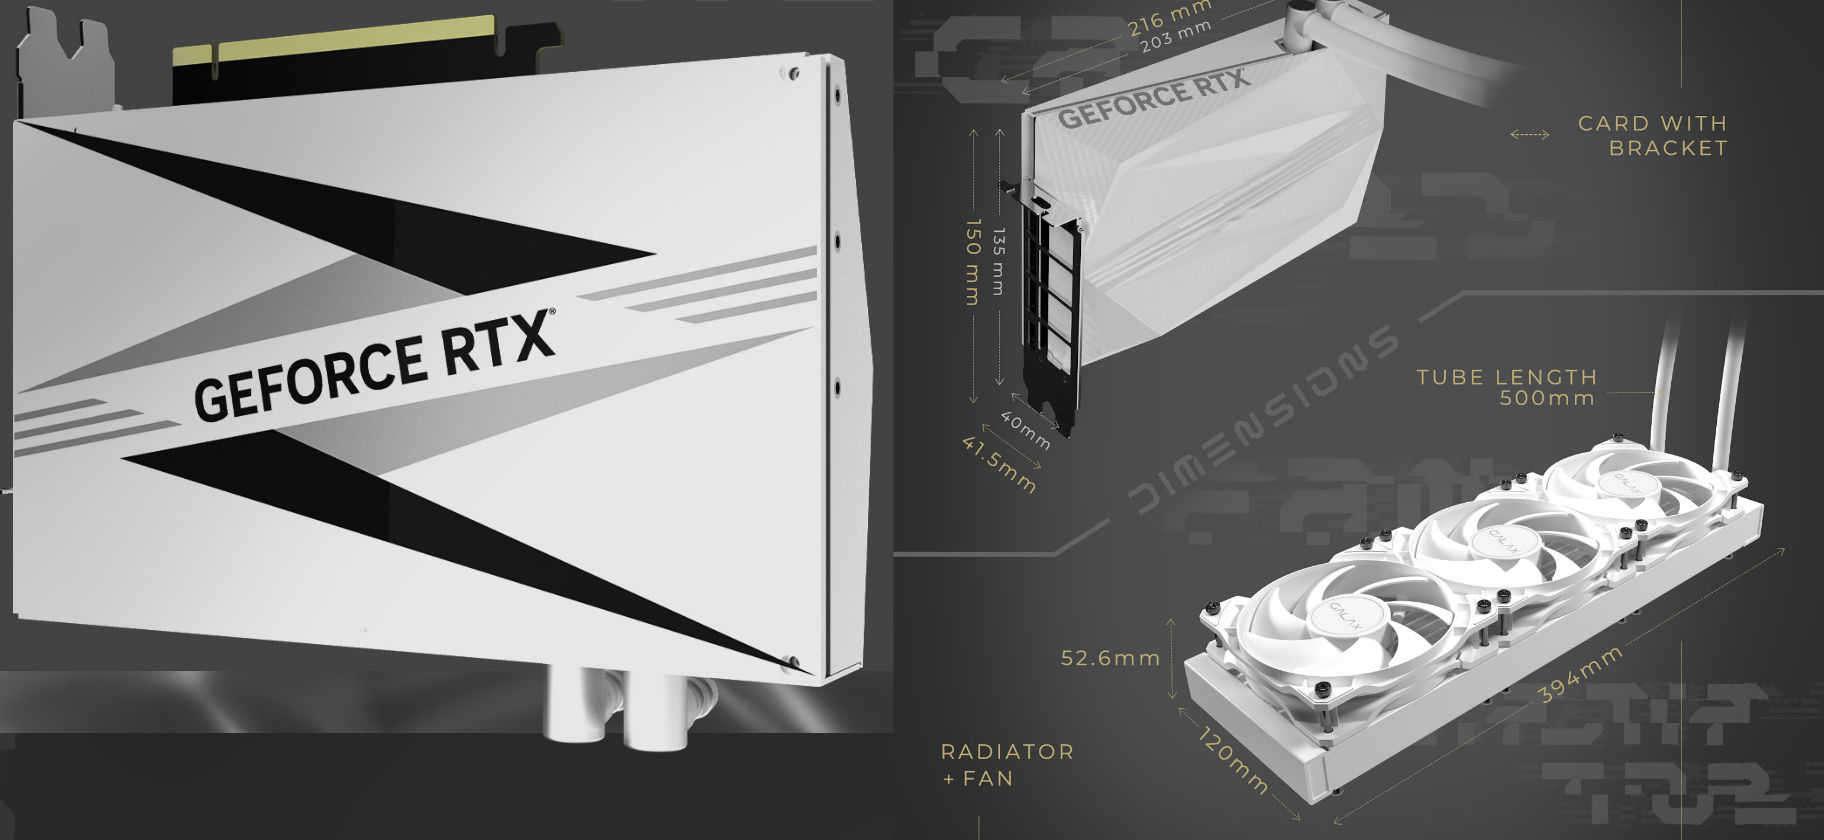 GALAX Announces its GeForce RTX 40 Series Graphics Card Family